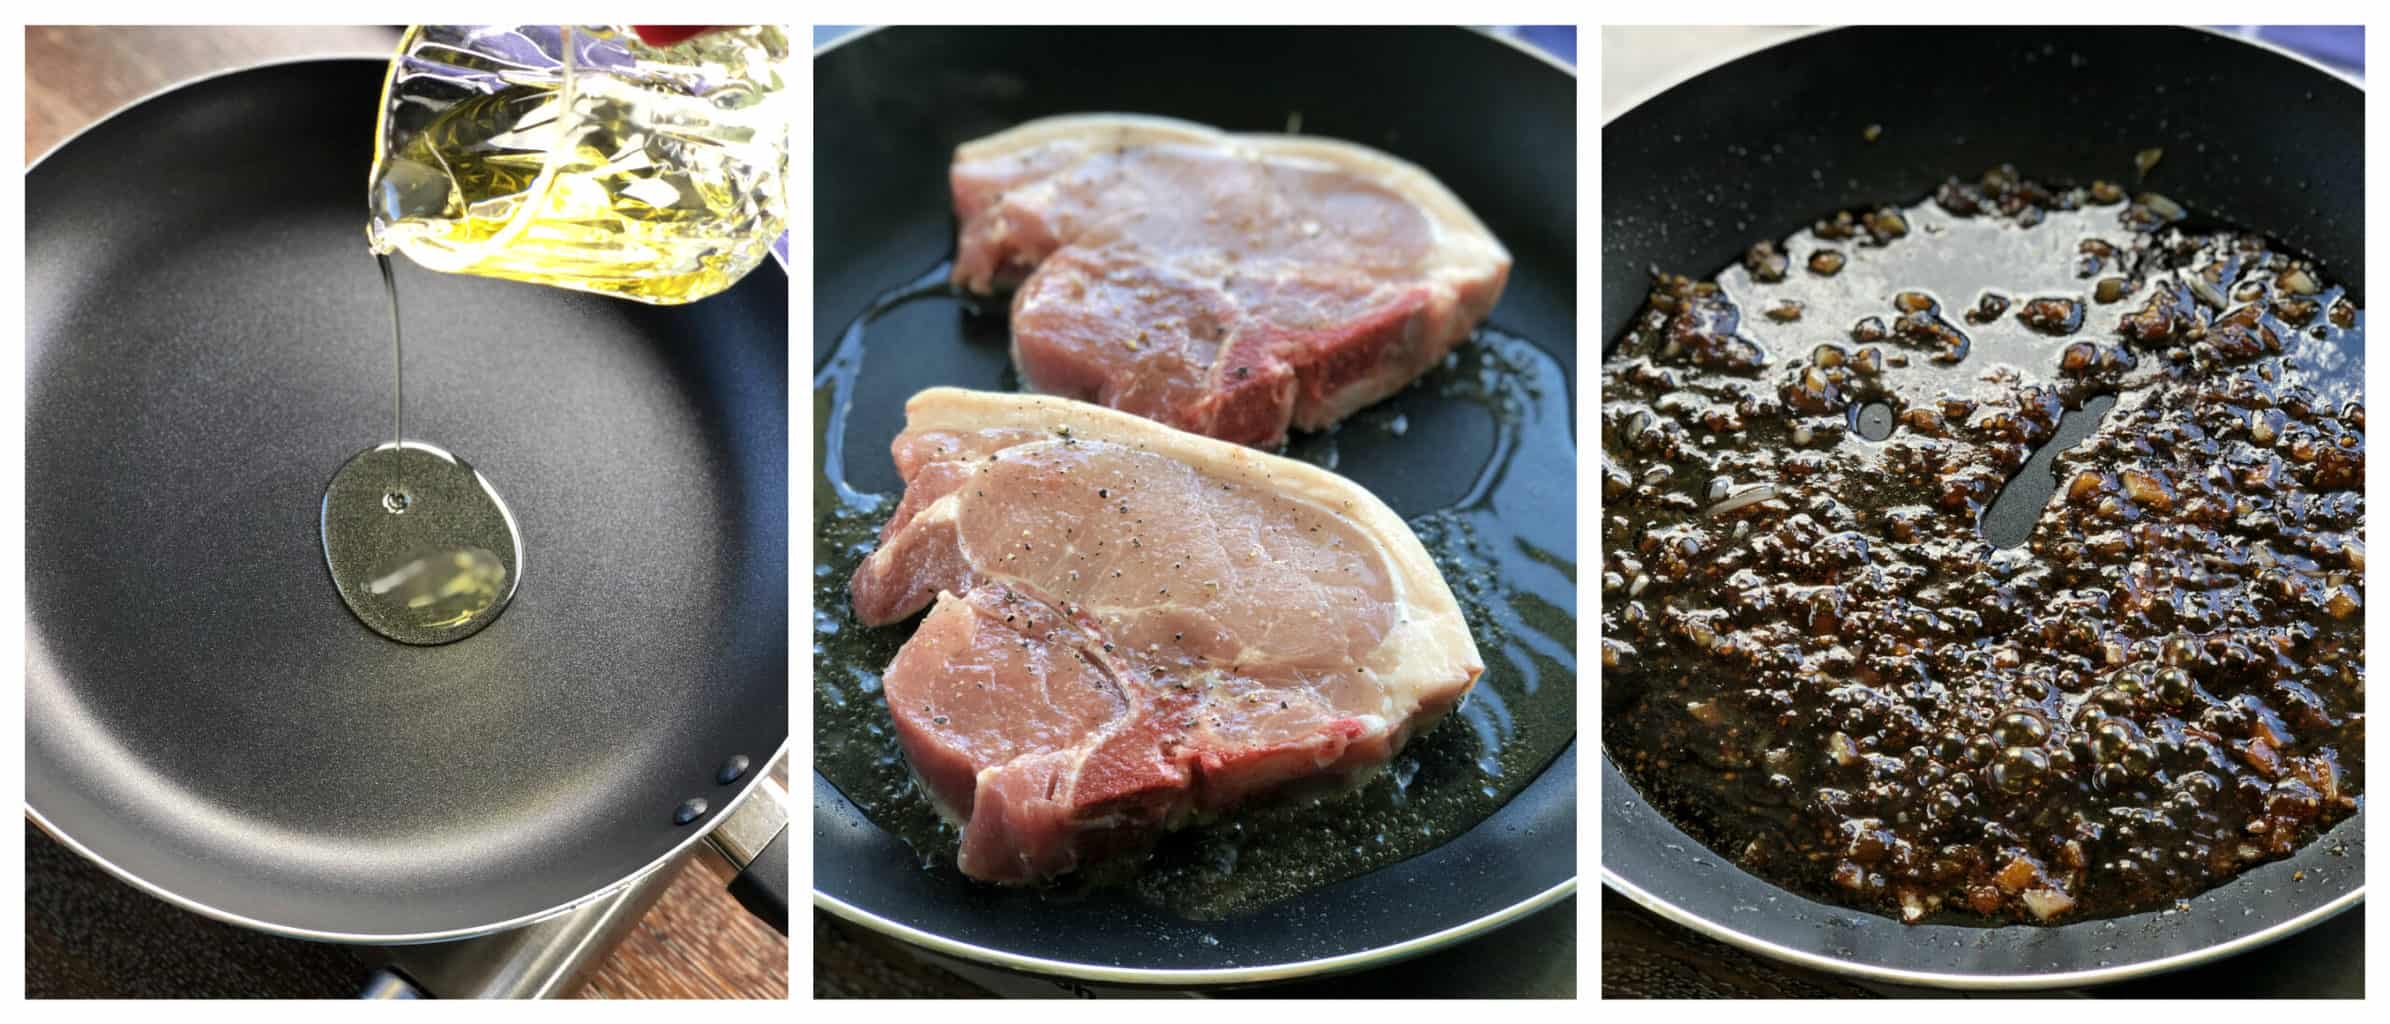 Steps for making my apricot and soy glazed pork chops, see the recipe for more